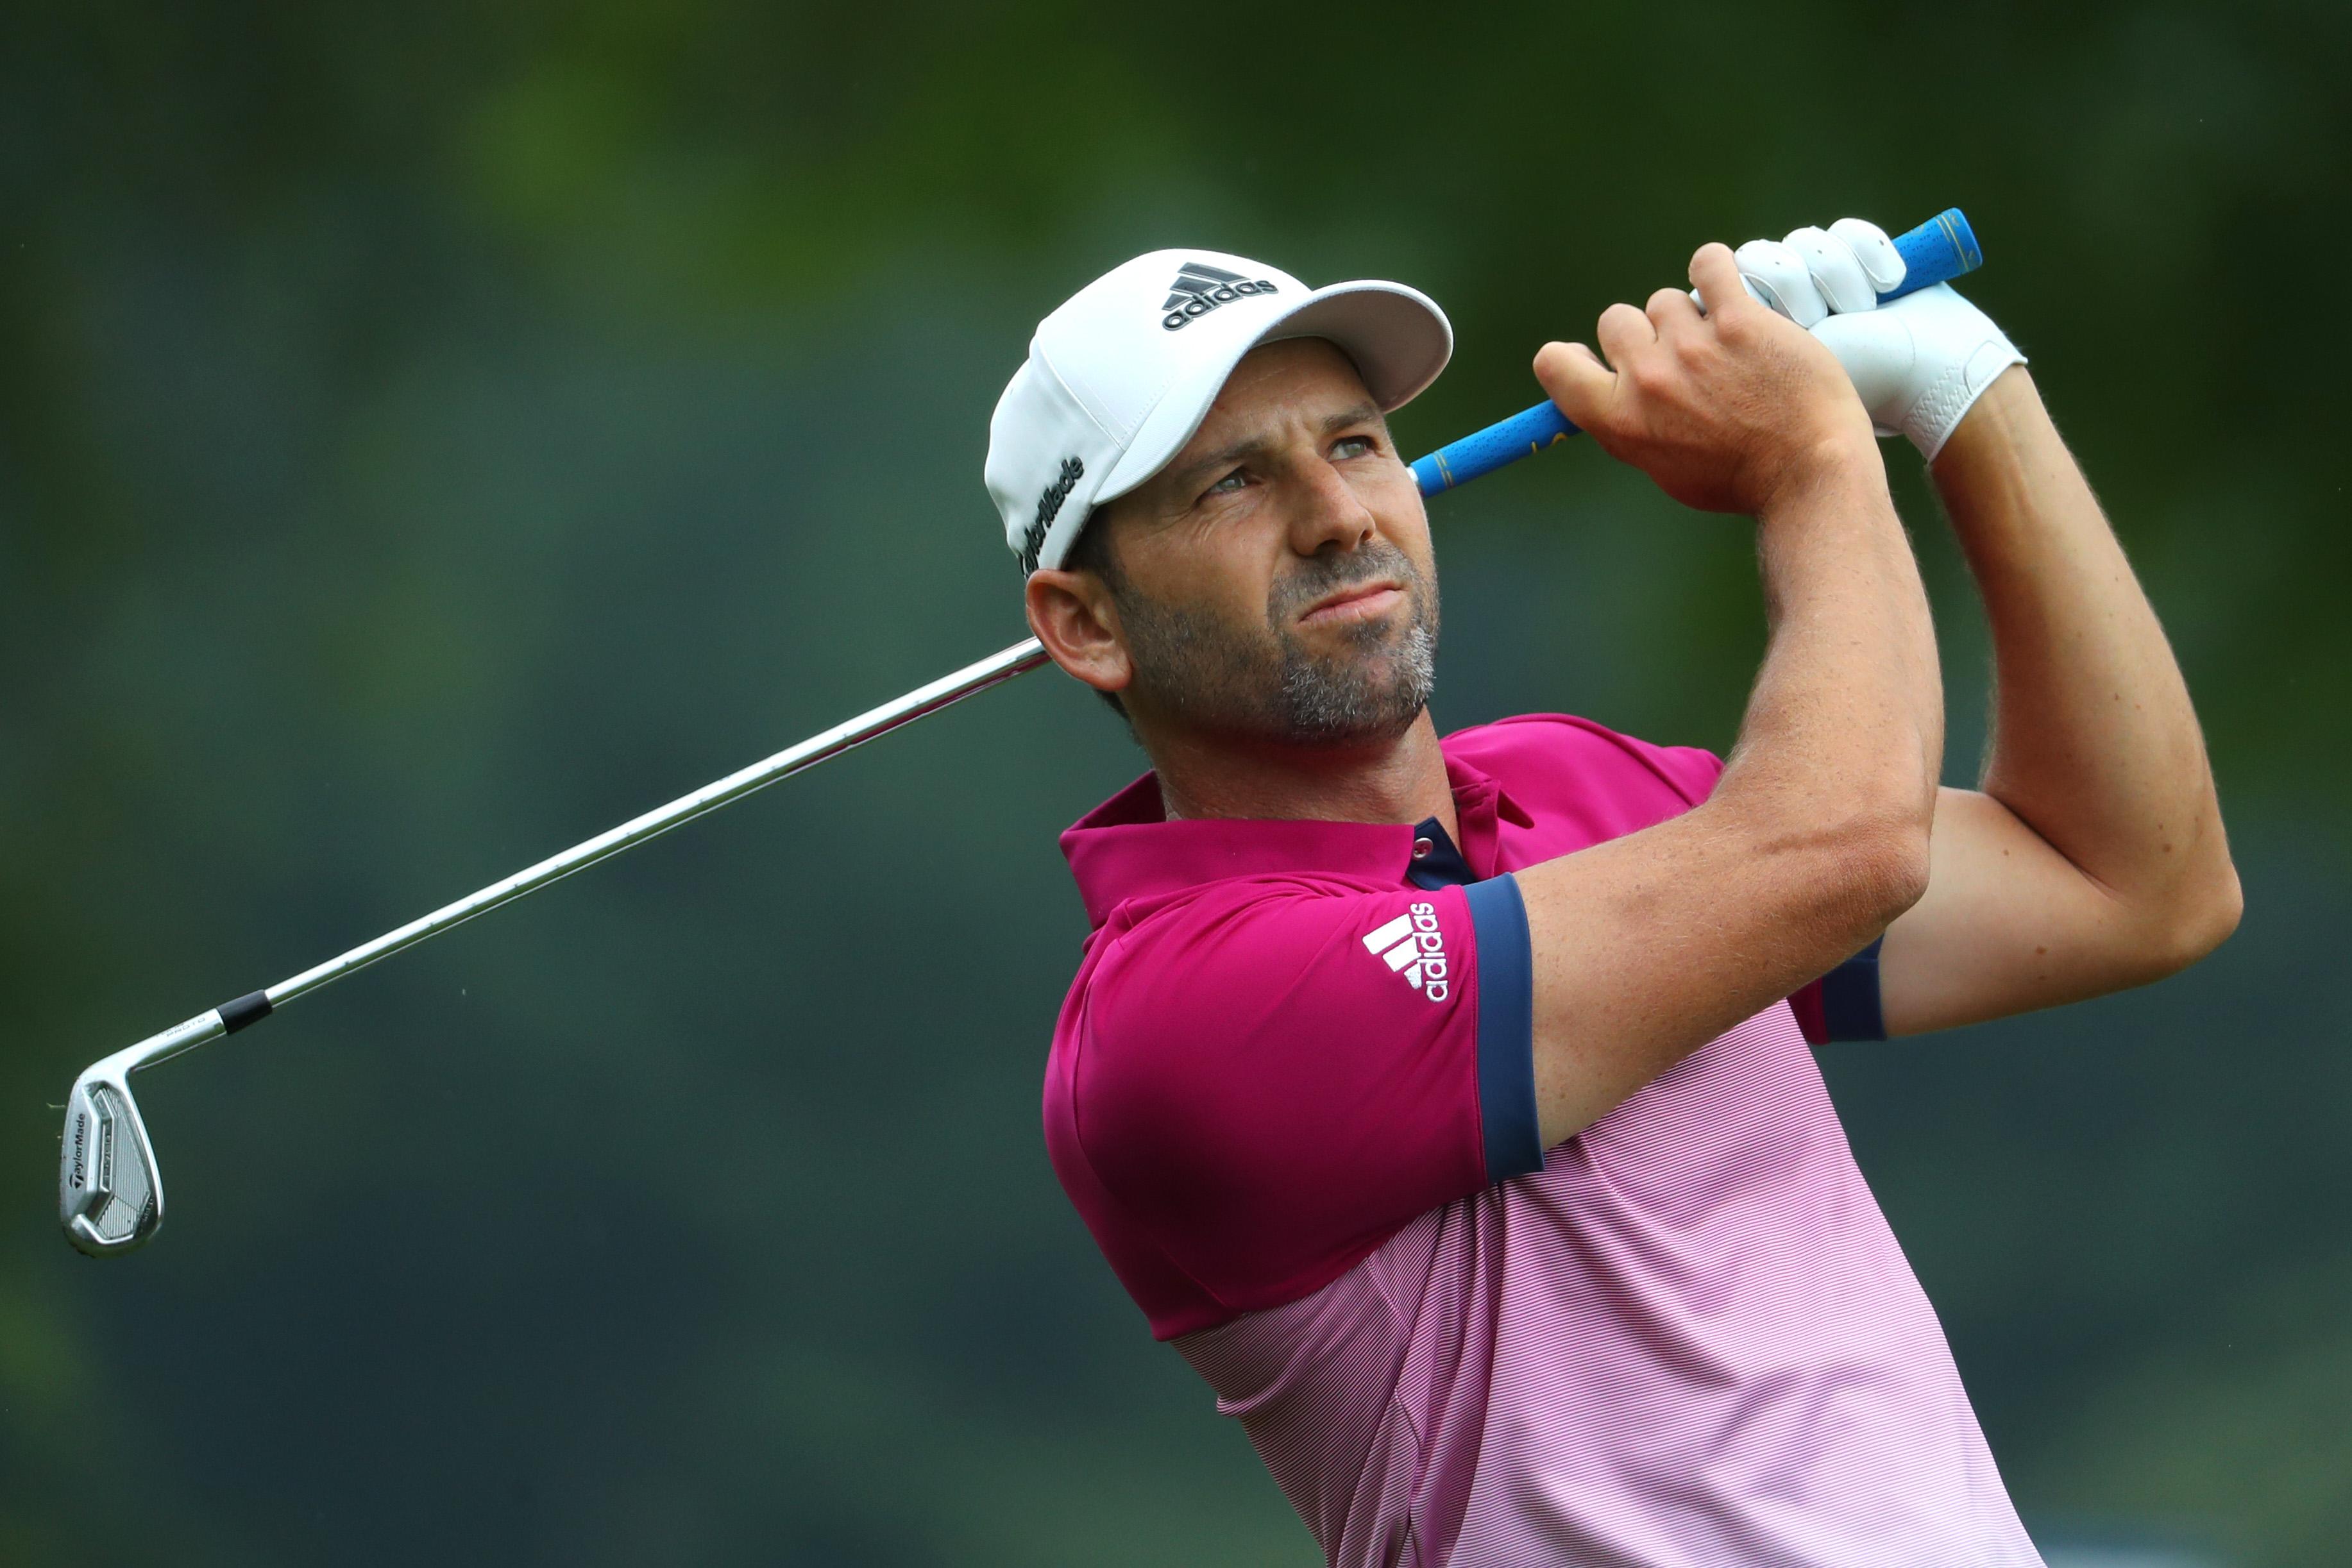 MUNICH, GERMANY - JUNE 25: Sergio Garcia of Spain hits his second shot on the 1st hole during the final round of the BMW International Open at Golfclub Munchen Eichenried on June 25, 2017 in Munich, Germany. (Photo by Warren Little/Getty Images)